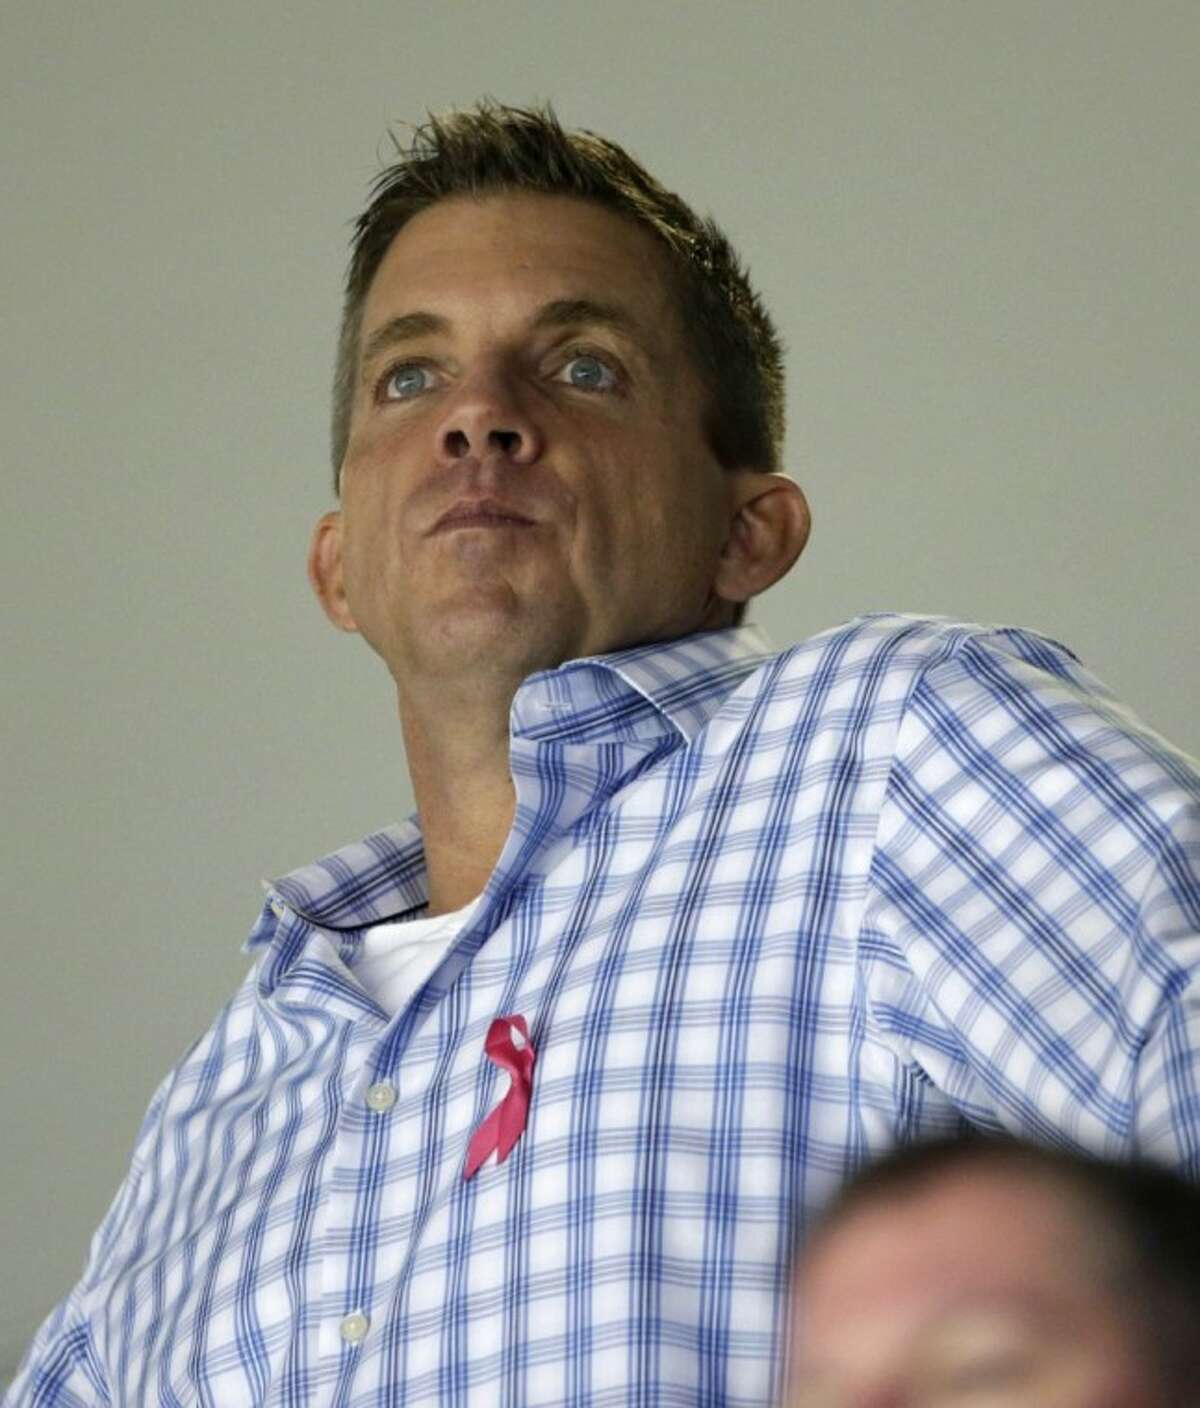 Suspended Saints coach Sean Payton will be a free agent of sorts after the 2012 NFL season.